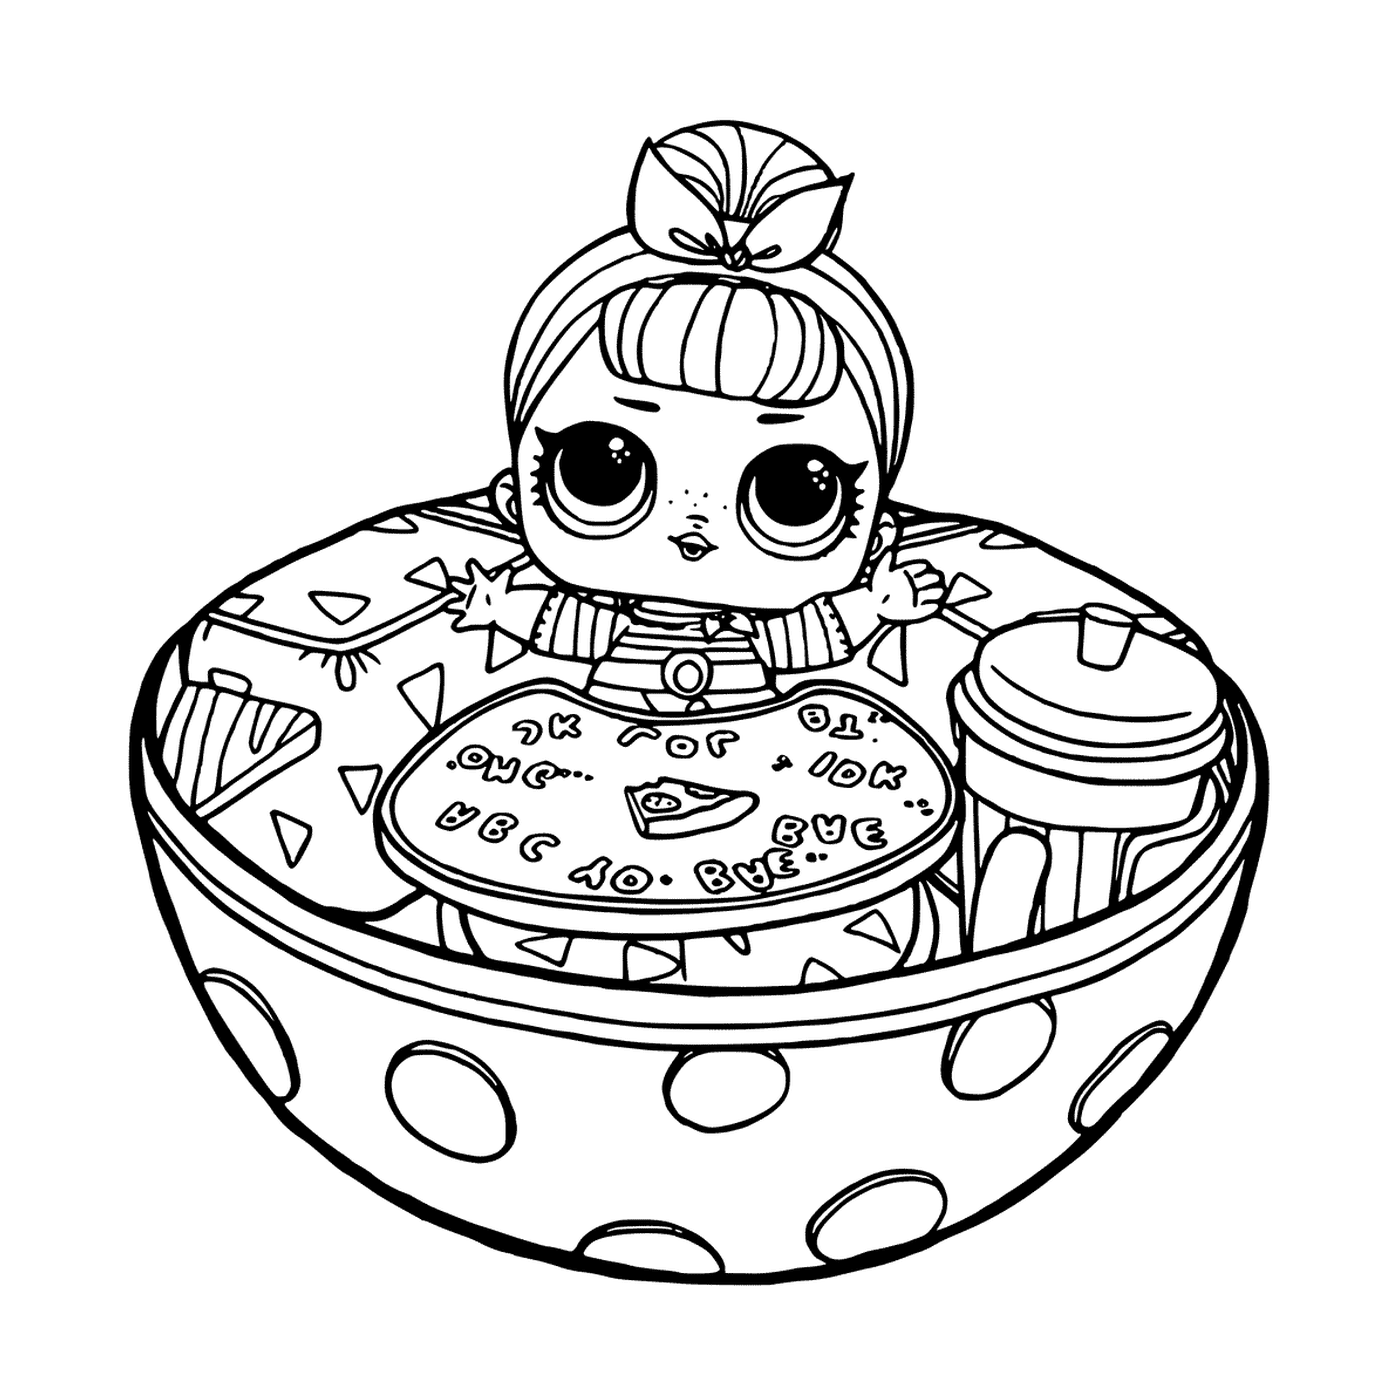  Doll in a bowl 